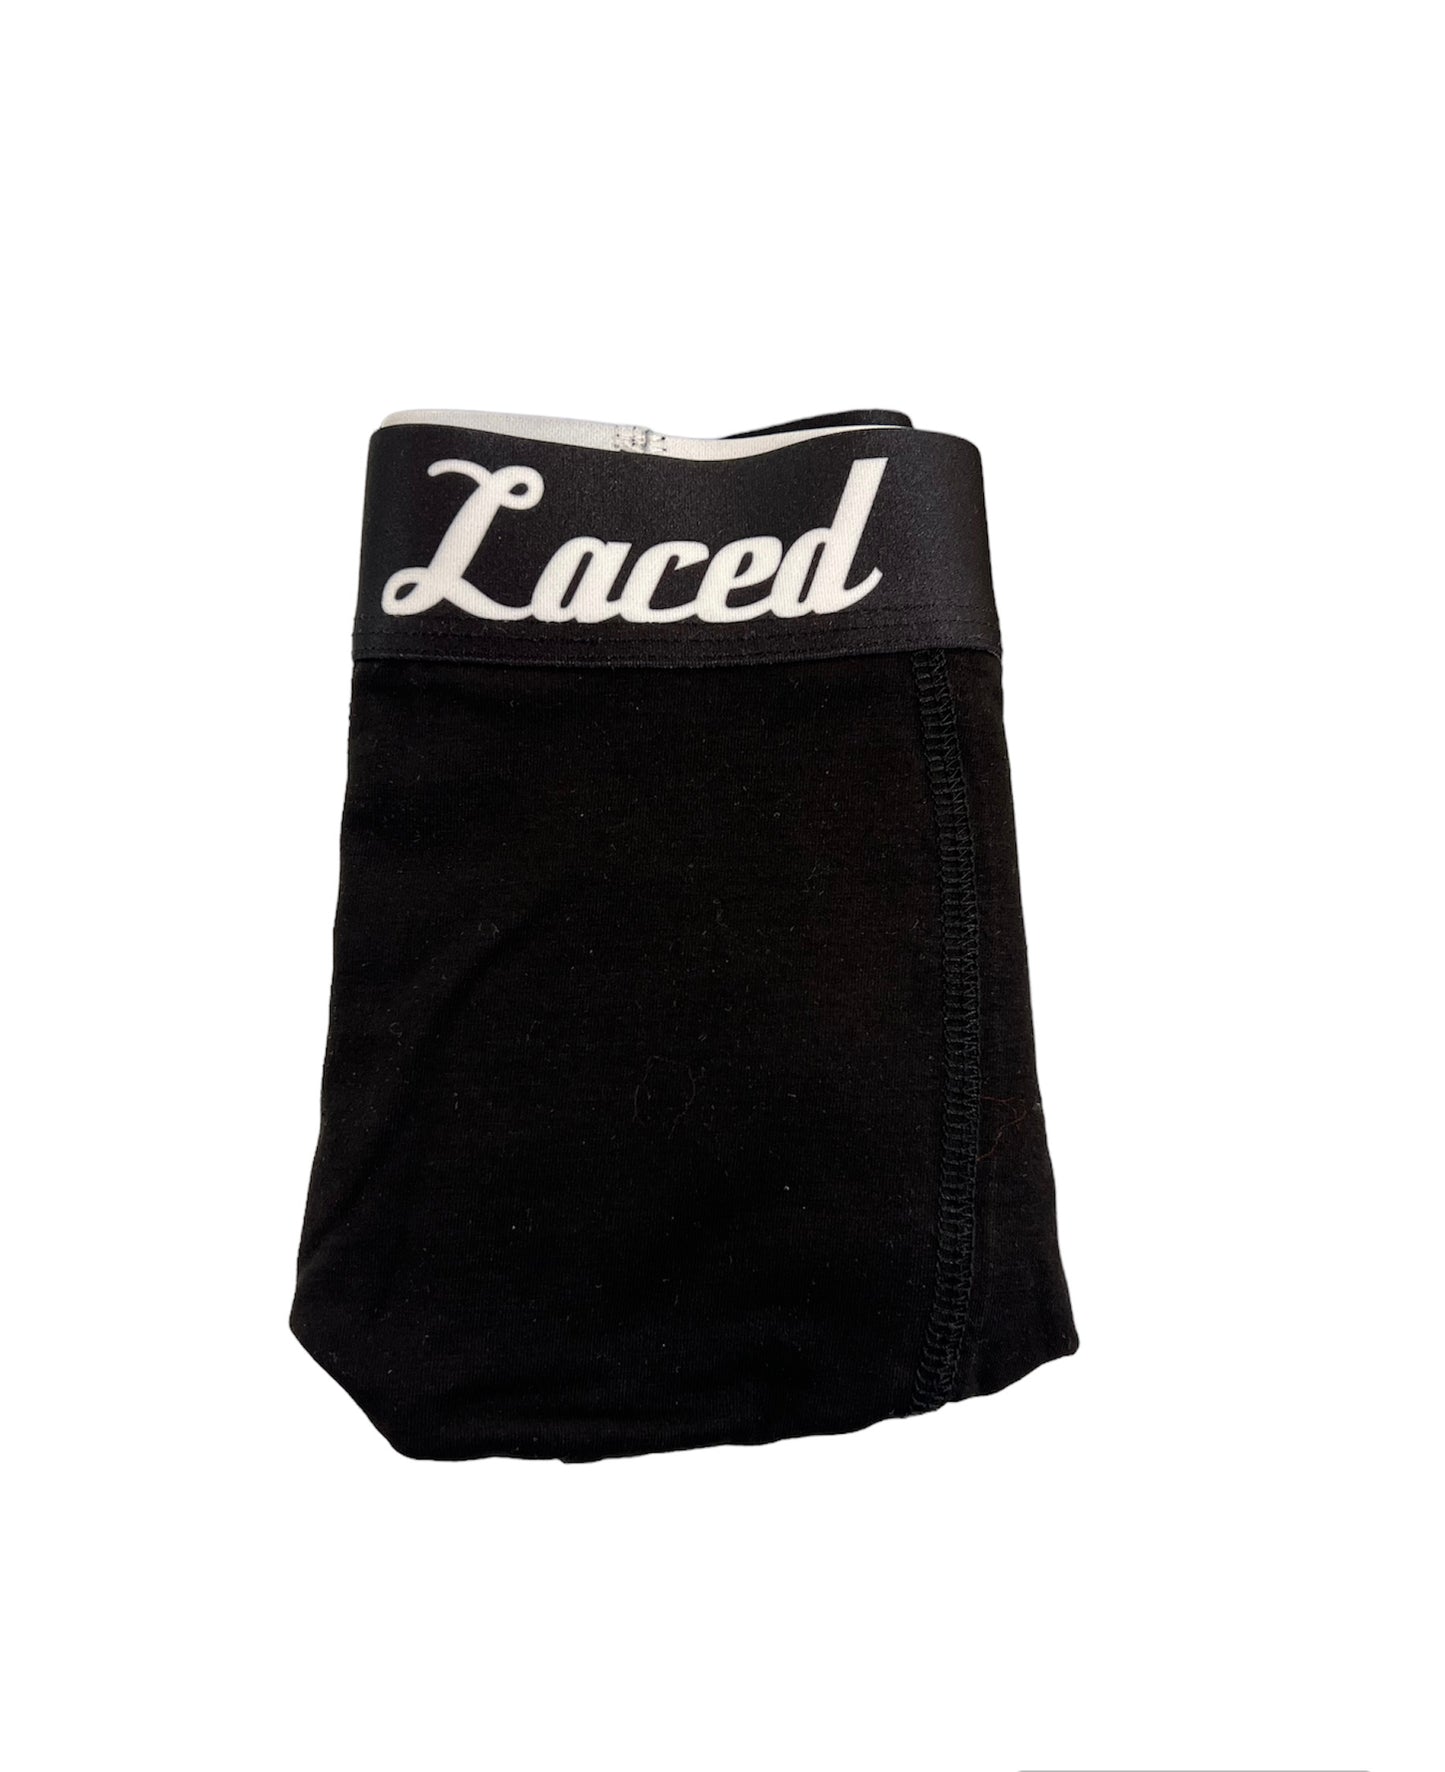 Laced Boxers Black